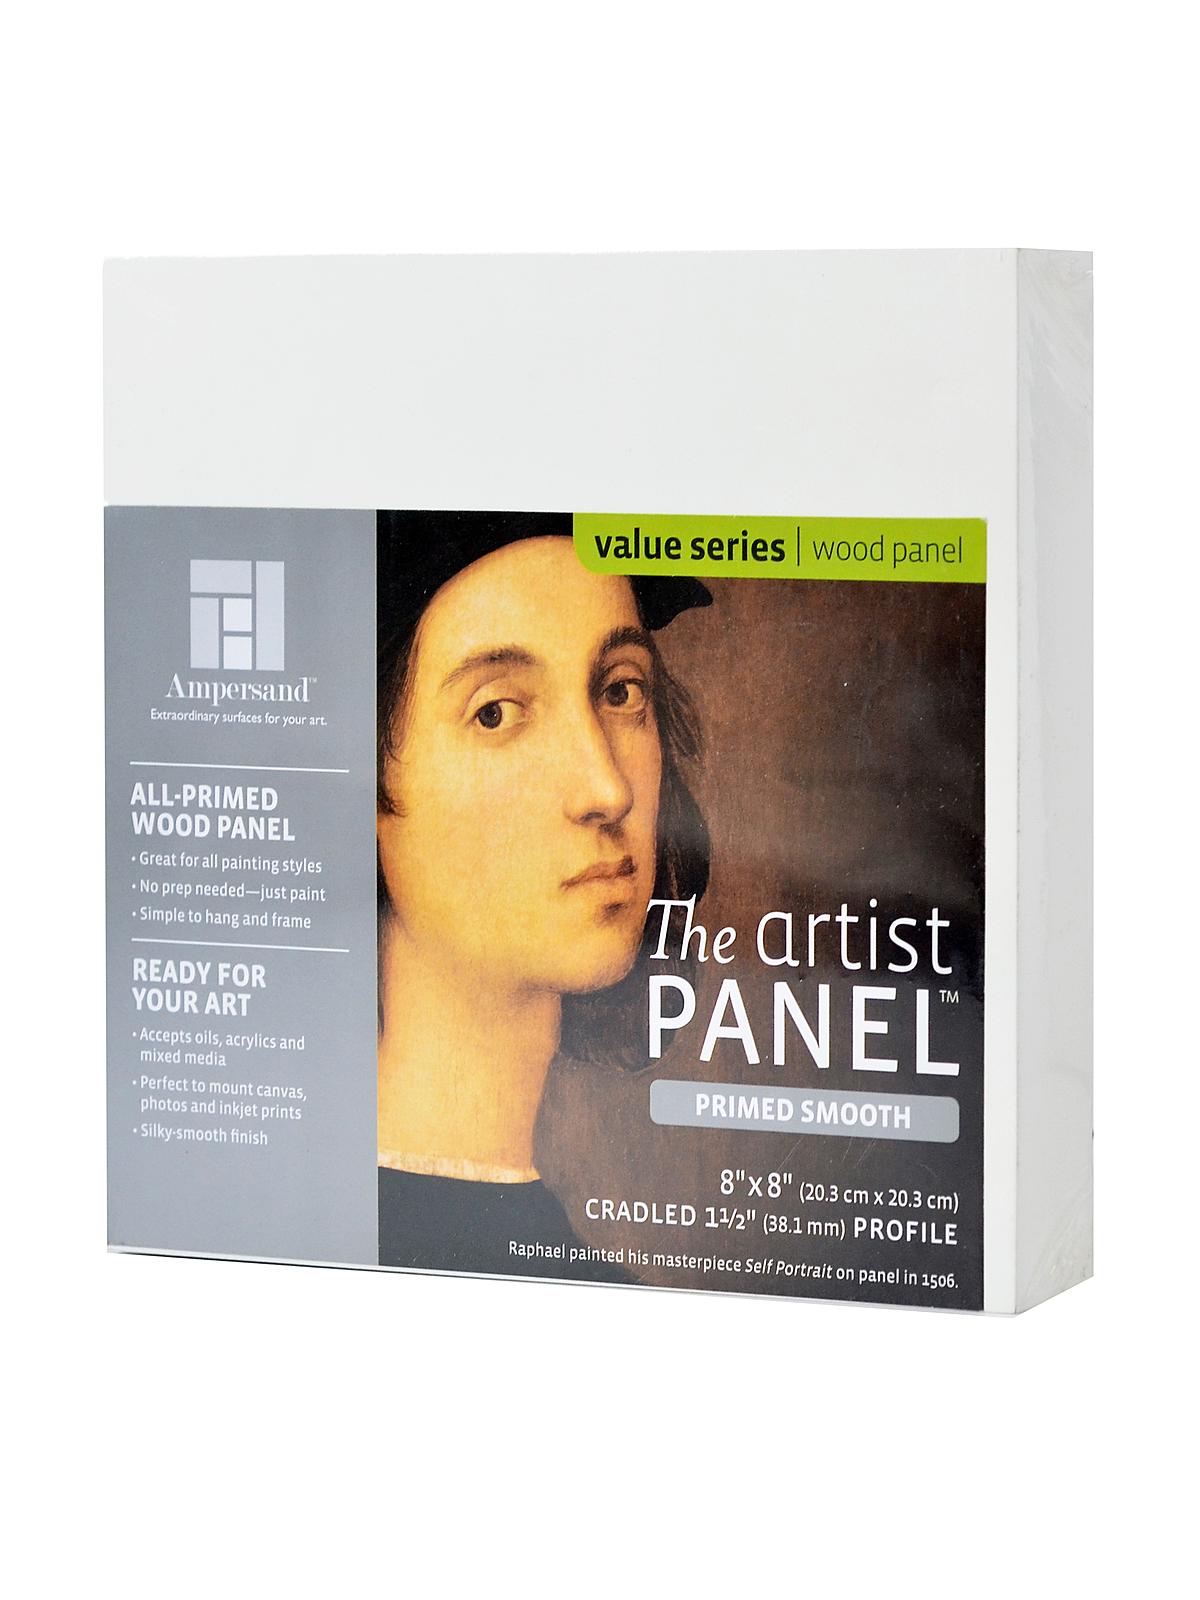 The Artist Panel Primed Smooth Cradled Profile 1 1 2 In. 8 In. X 8 In.